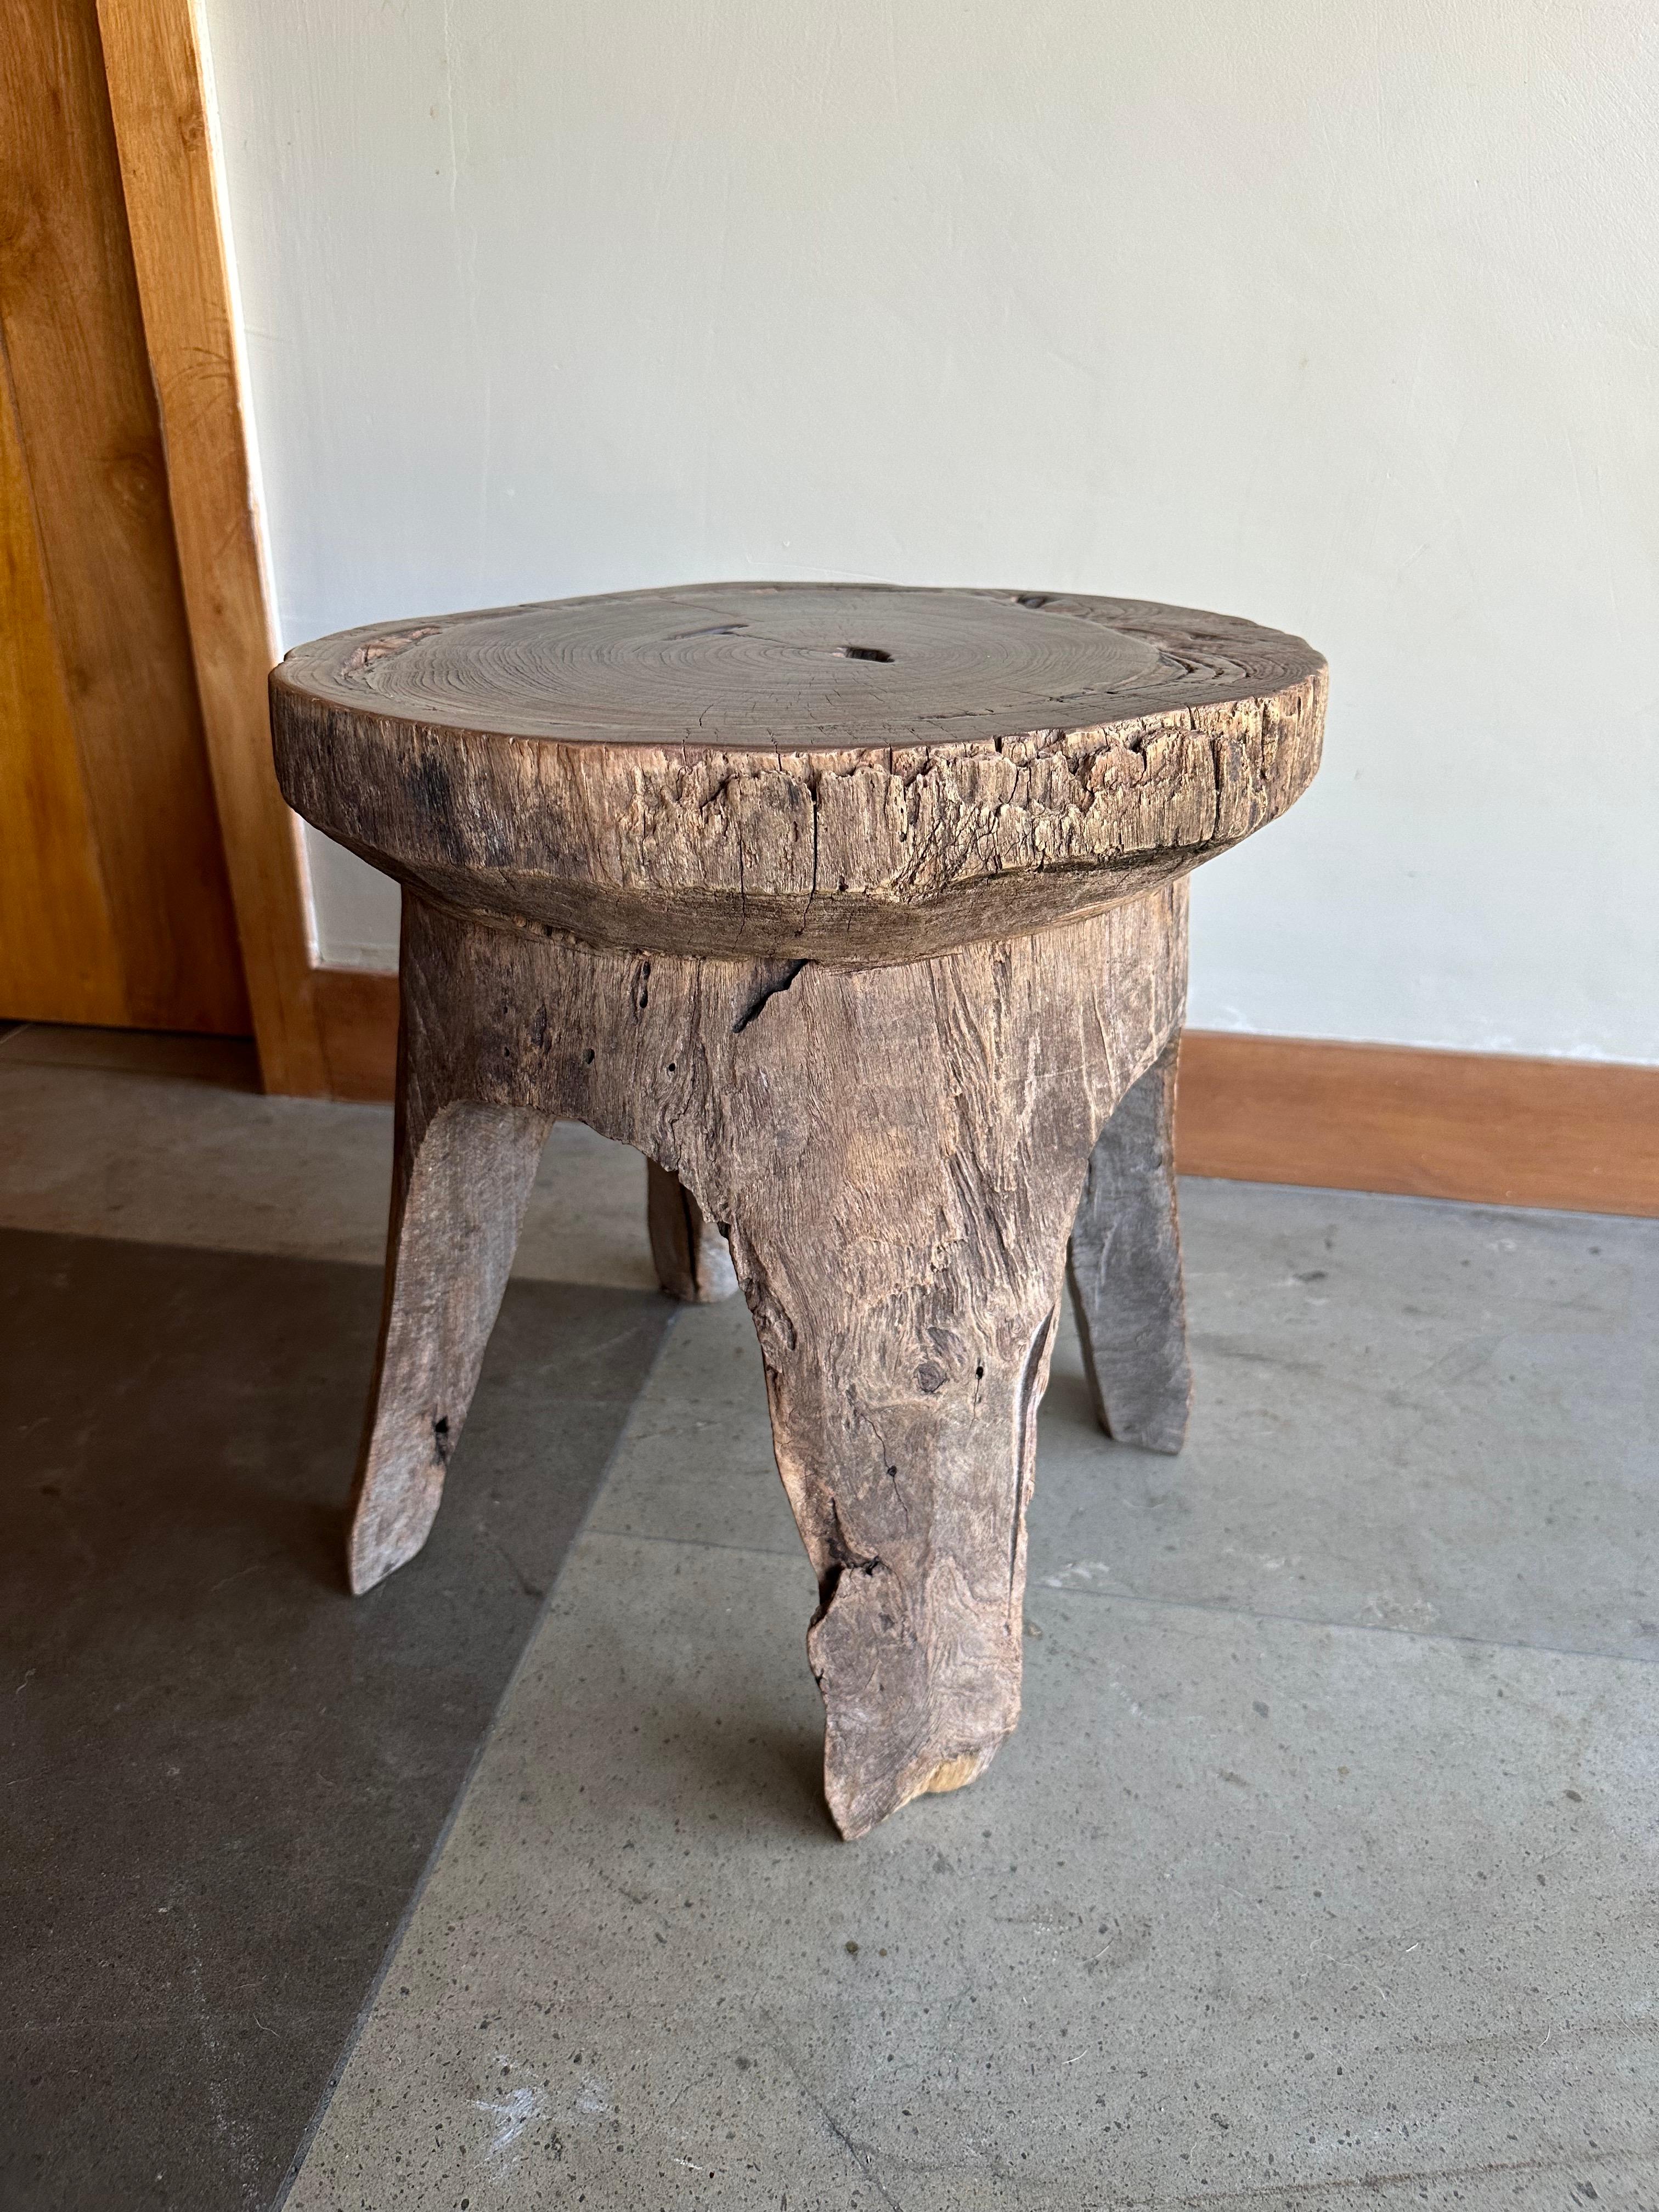 A wonderfully vibrant antique teak stool from Java, Indonesia. This stool was carved from a single block of wood and features a wonderful mix of wood textures and shades. The age-related patina adds to its charm. The perfect object to bring warmth